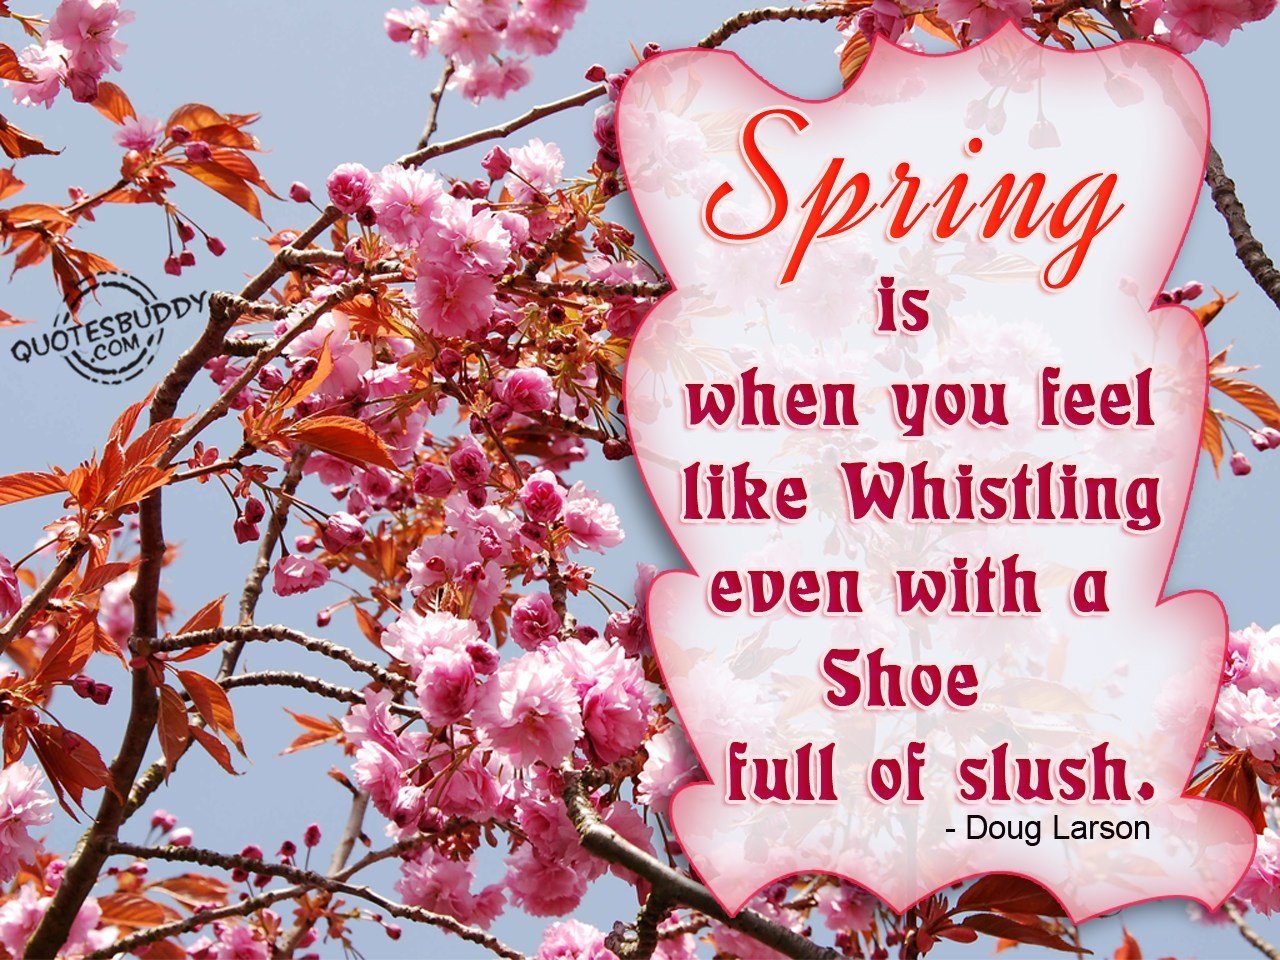 Spring quotes. Quotes about Spring. Seasons are beautiful